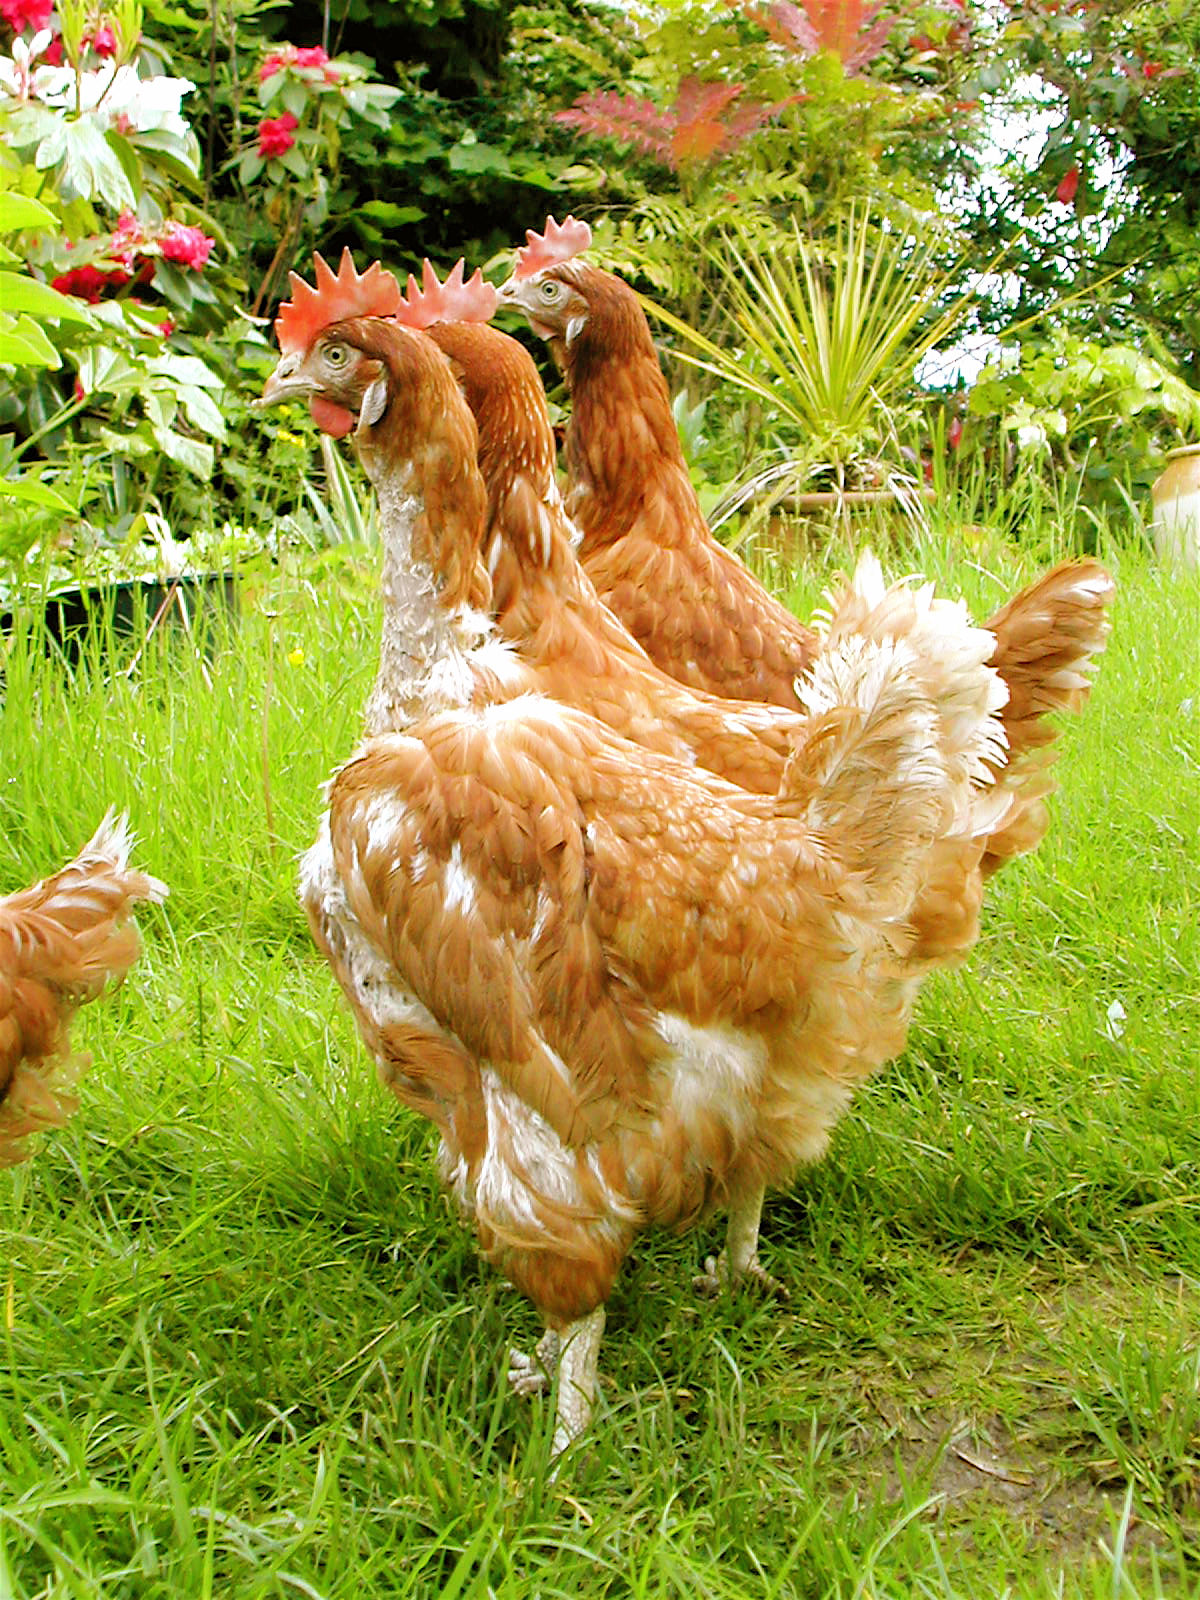 Three moulting chickens roaming around the garden in search for some tasty worms